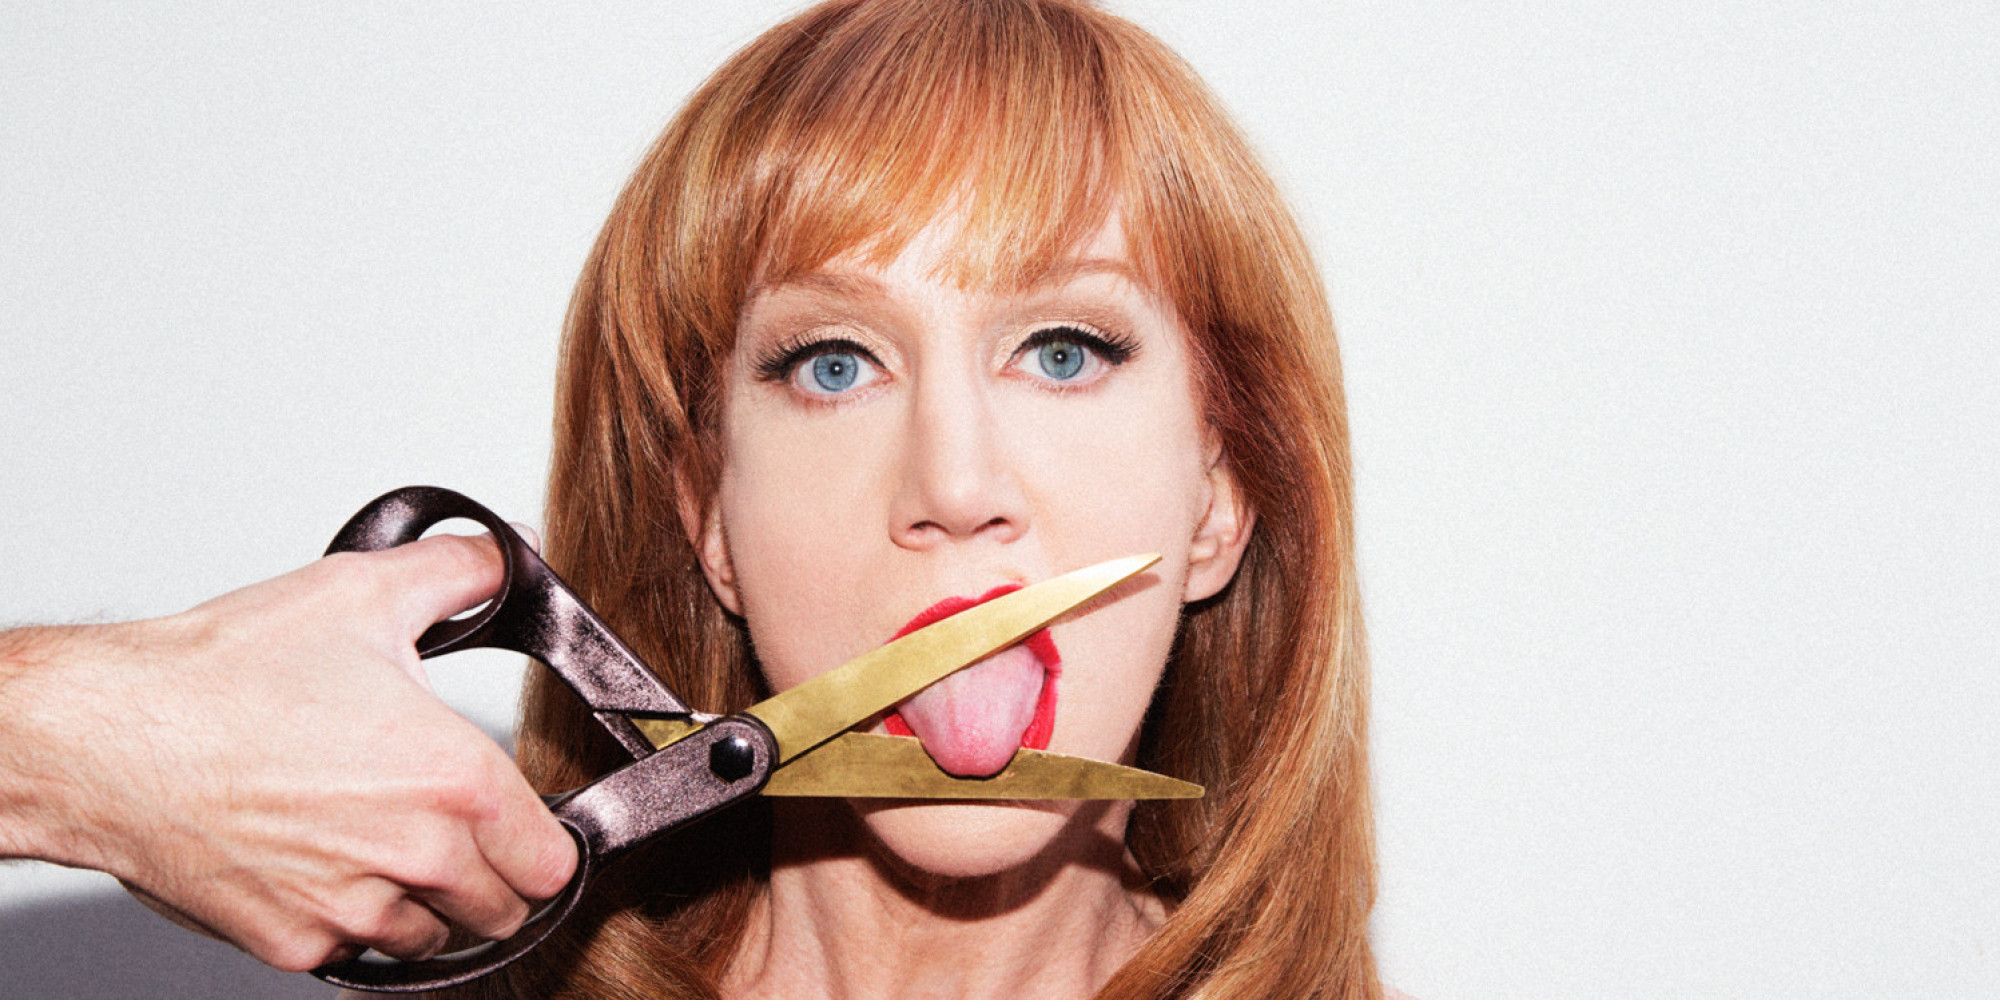 Kathy Griffen cut her own tounge off